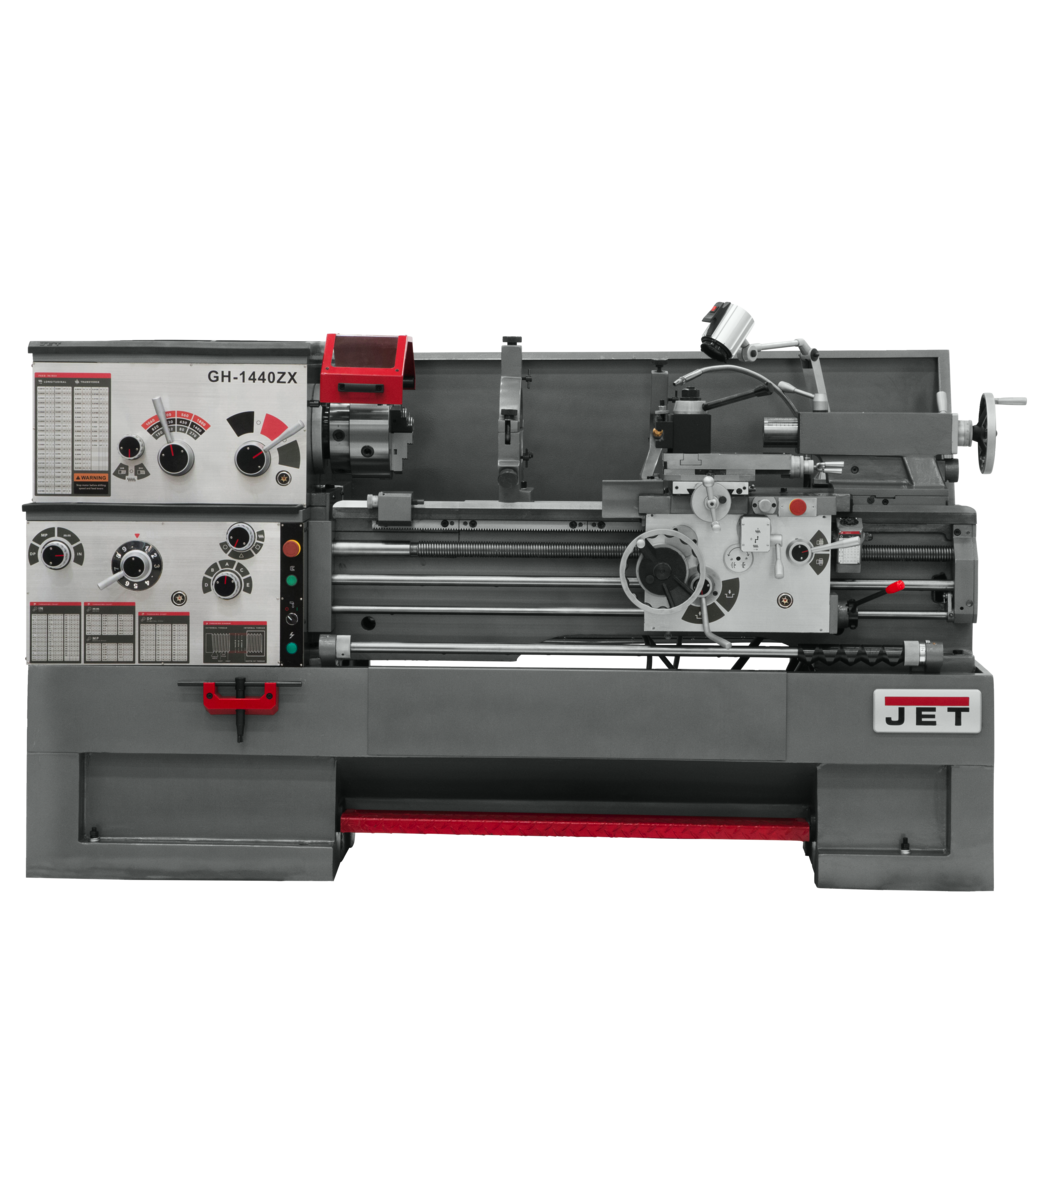 321910, GH-1440ZX, GH-1440ZX, 14" Swing 40" Centers, D1-8 Camlock Spindle, 7-1/2HP, 3Ph, 230/460V, Jet, Metalworking, Turning, Lathes